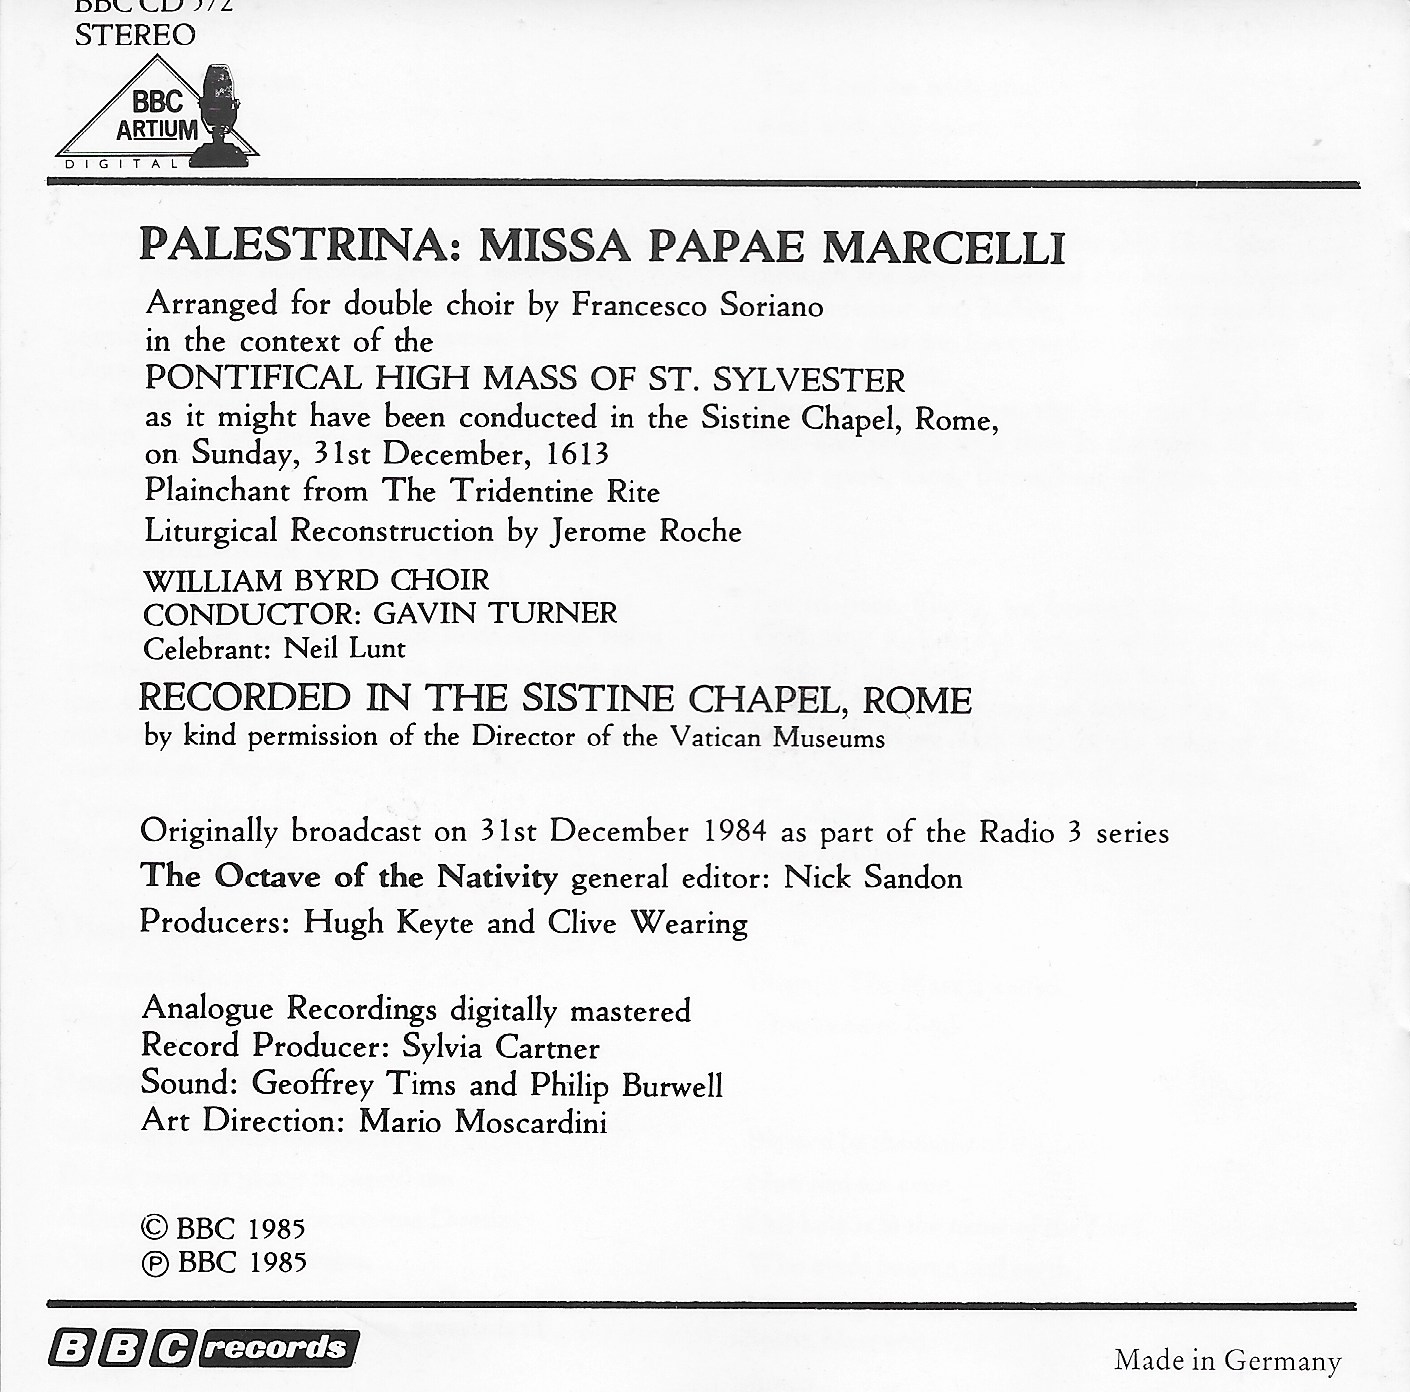 Back cover of BBCCD572